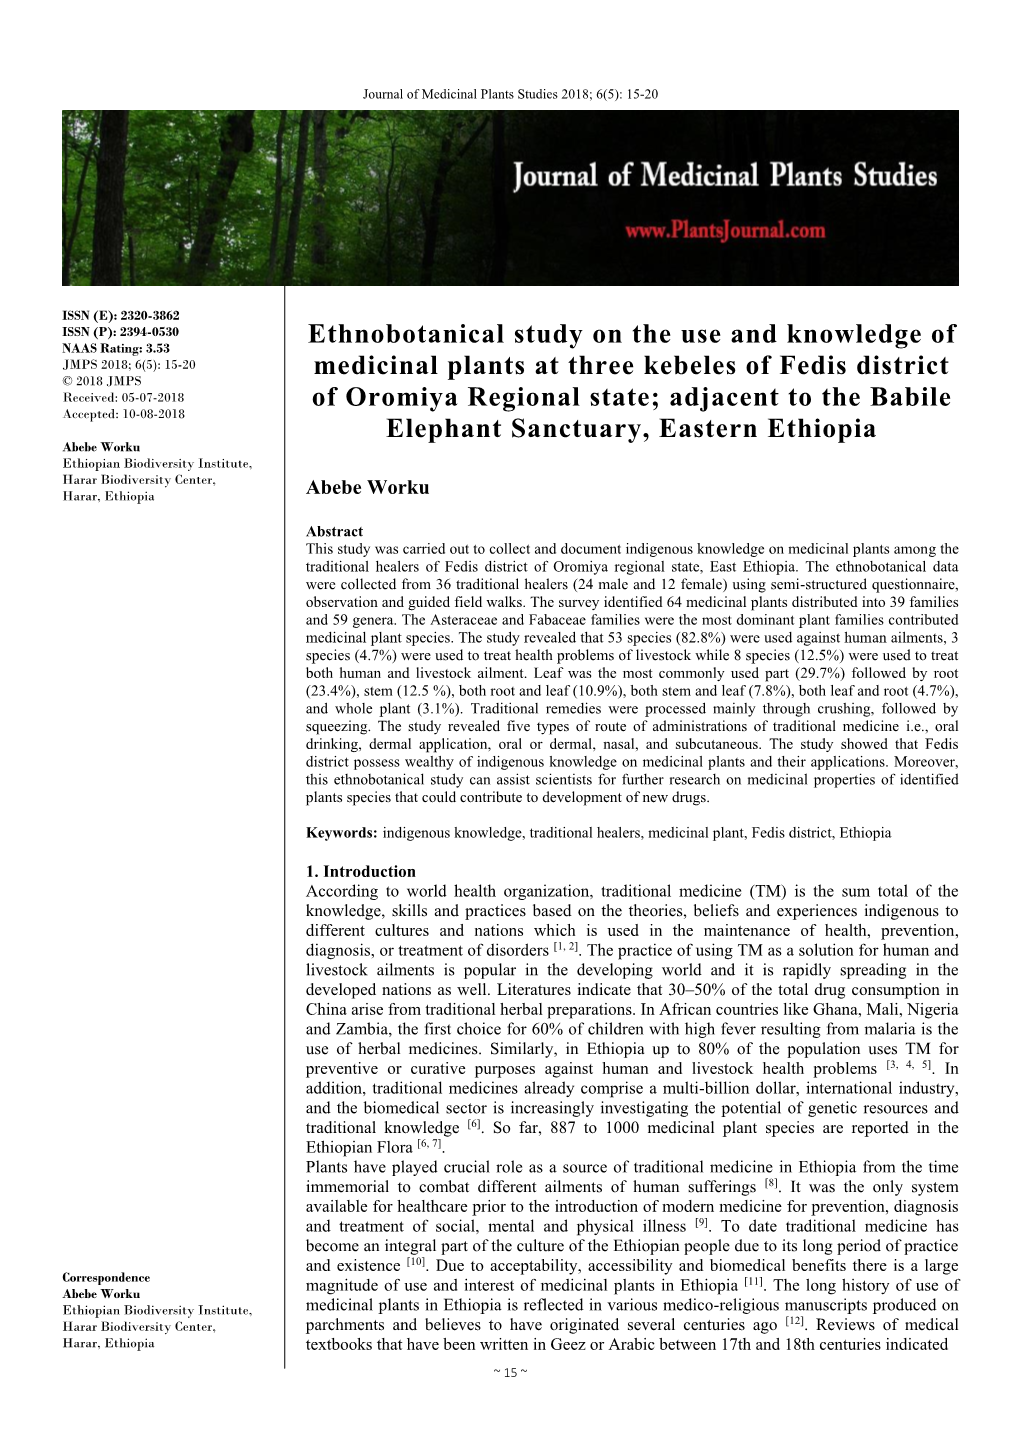 Ethnobotanical Study on the Use and Knowledge Of